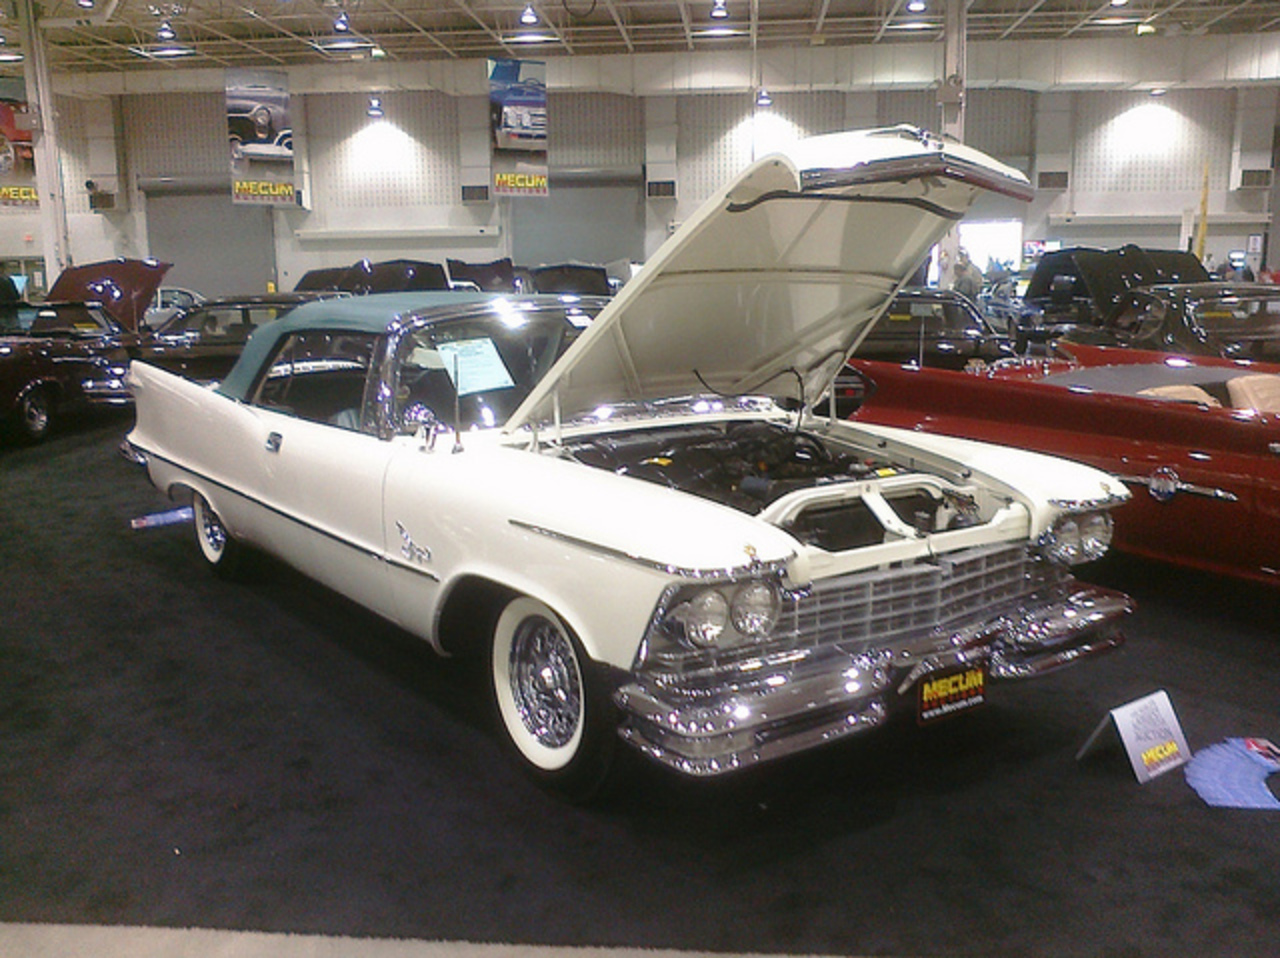 1957 Chrysler Imperial Convertible a | Flickr - Photo Sharing!